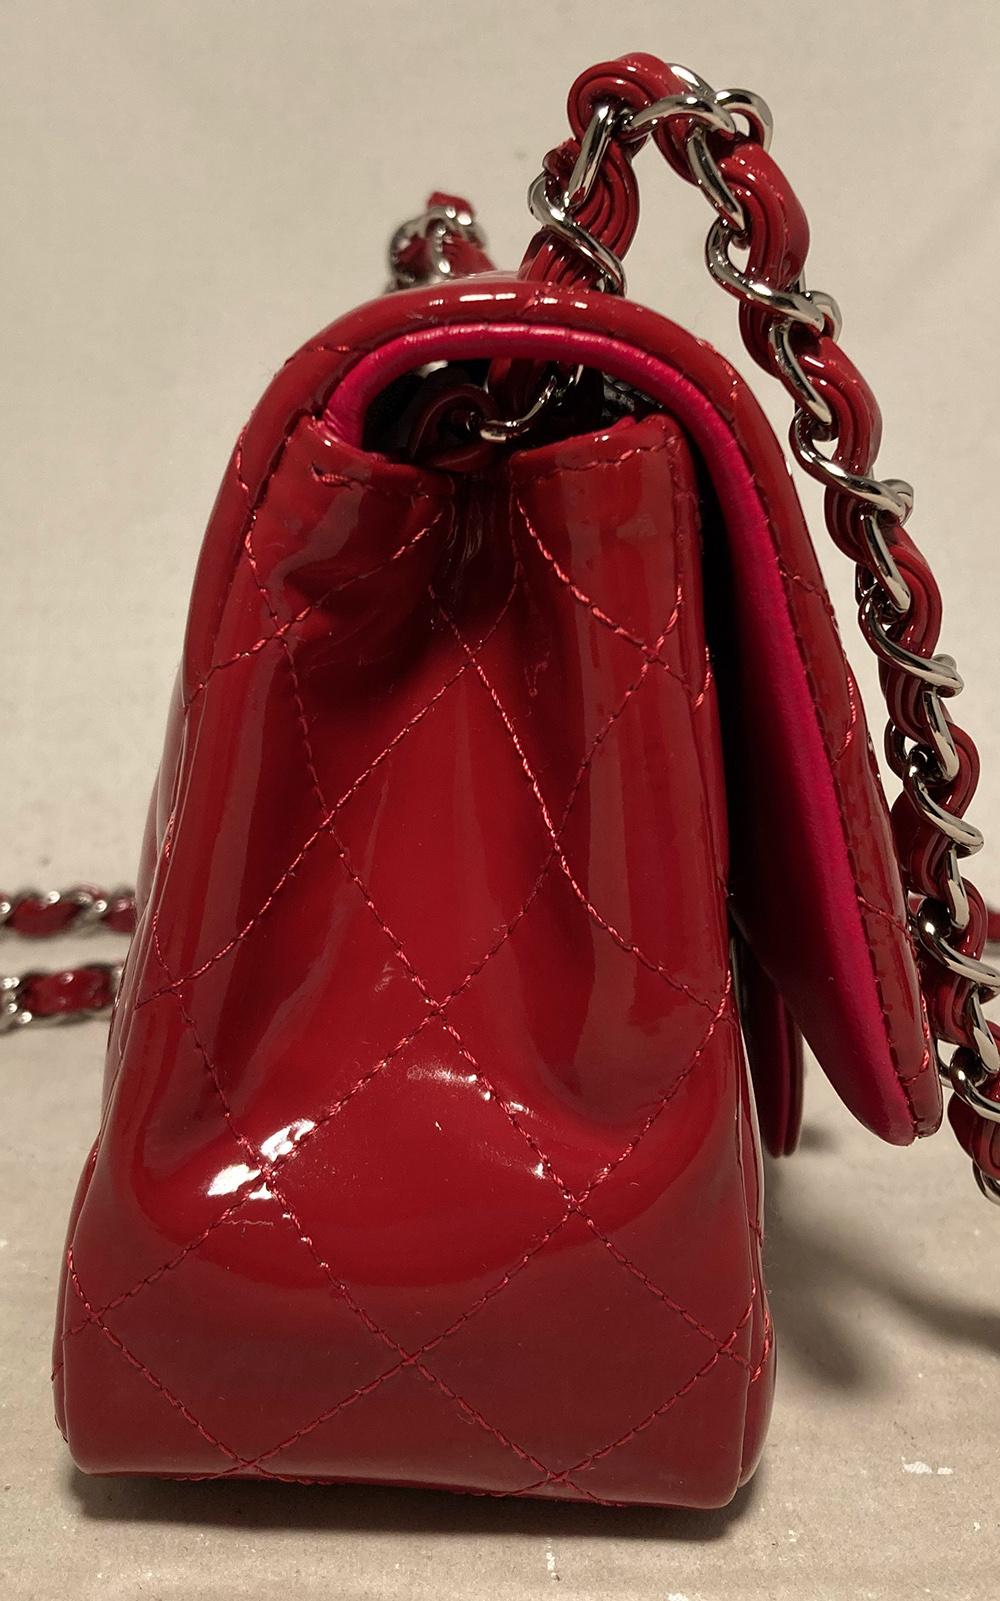 Chanel Red Patent Leather Mini Classic Flap in very good condition. Red quilted patent leather exterior trimmed with silver hardware. Front CC logo twist closure opens via single flap to a matching red leather interior that holds one slit and one